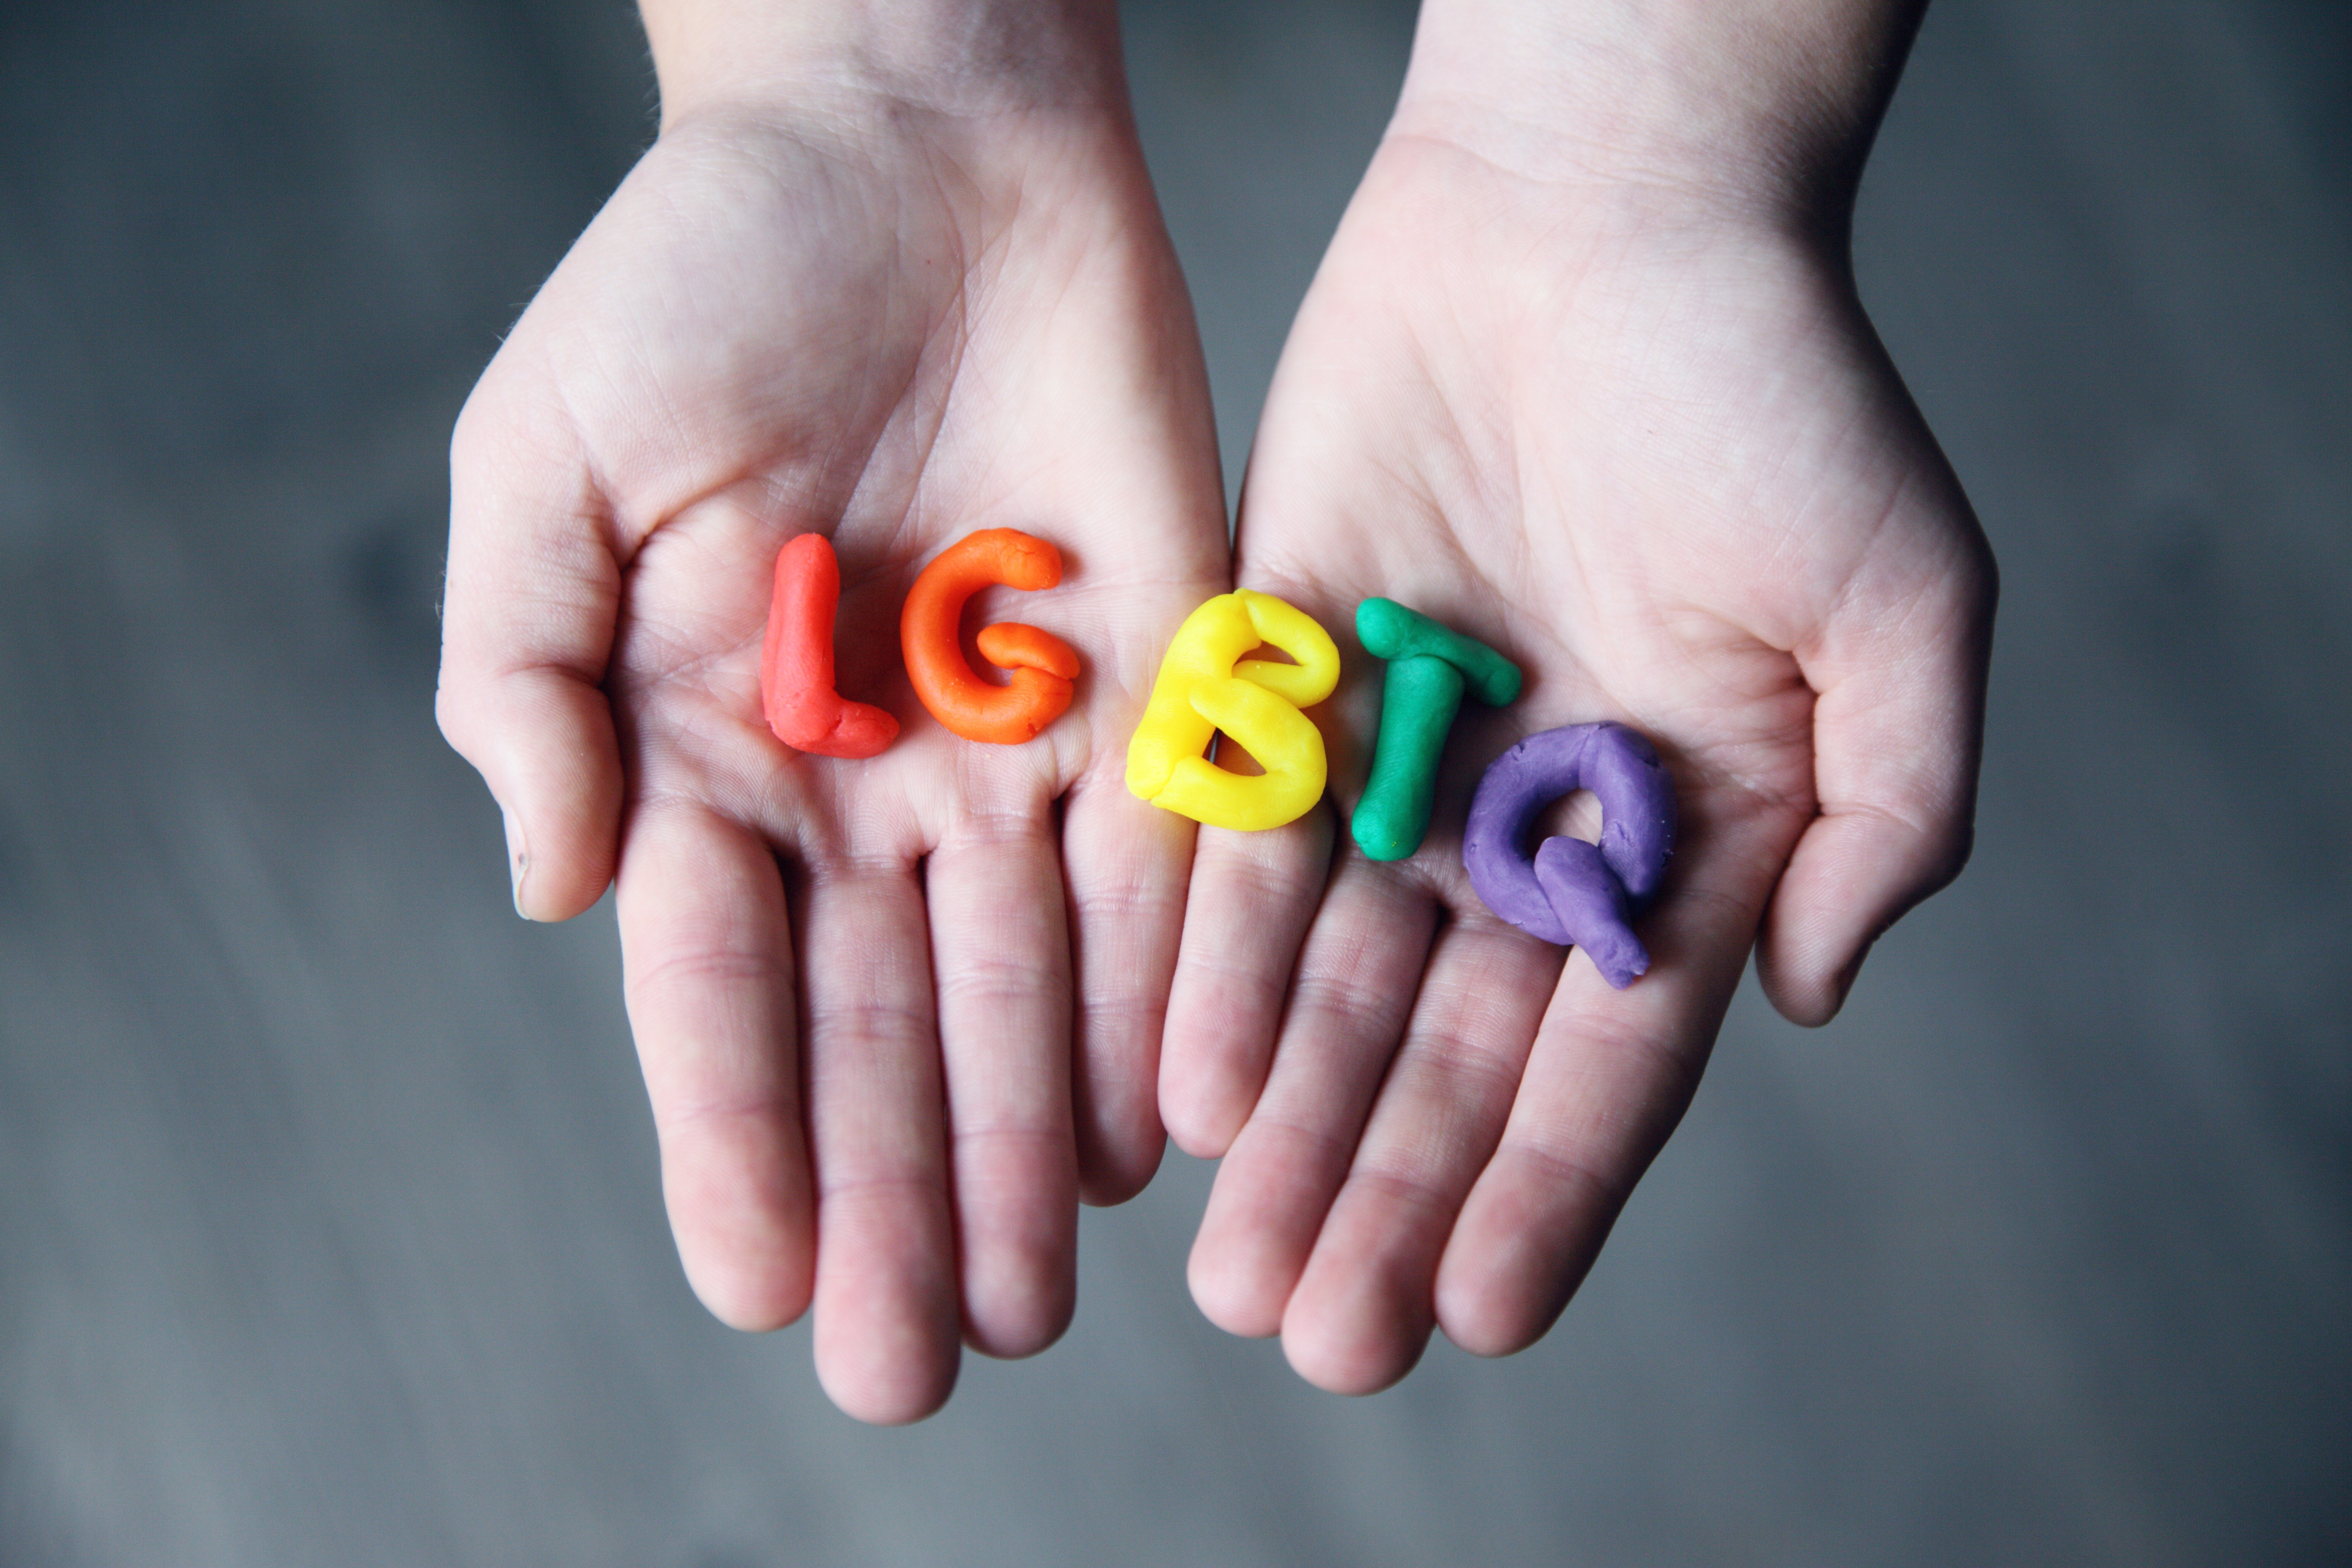 Hands holding colourful letters spelling LGBTQ